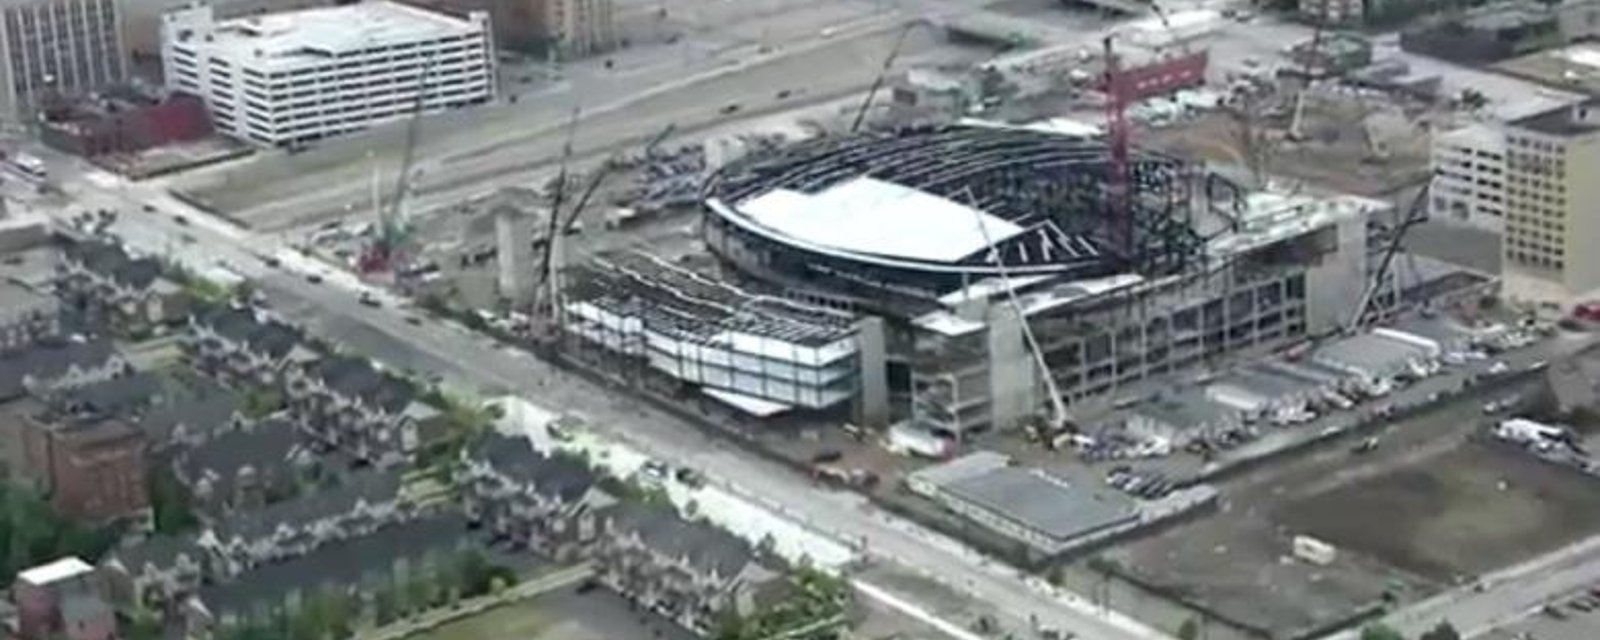 Video shows progress on Red Wings new “Little Caesars Arena.”